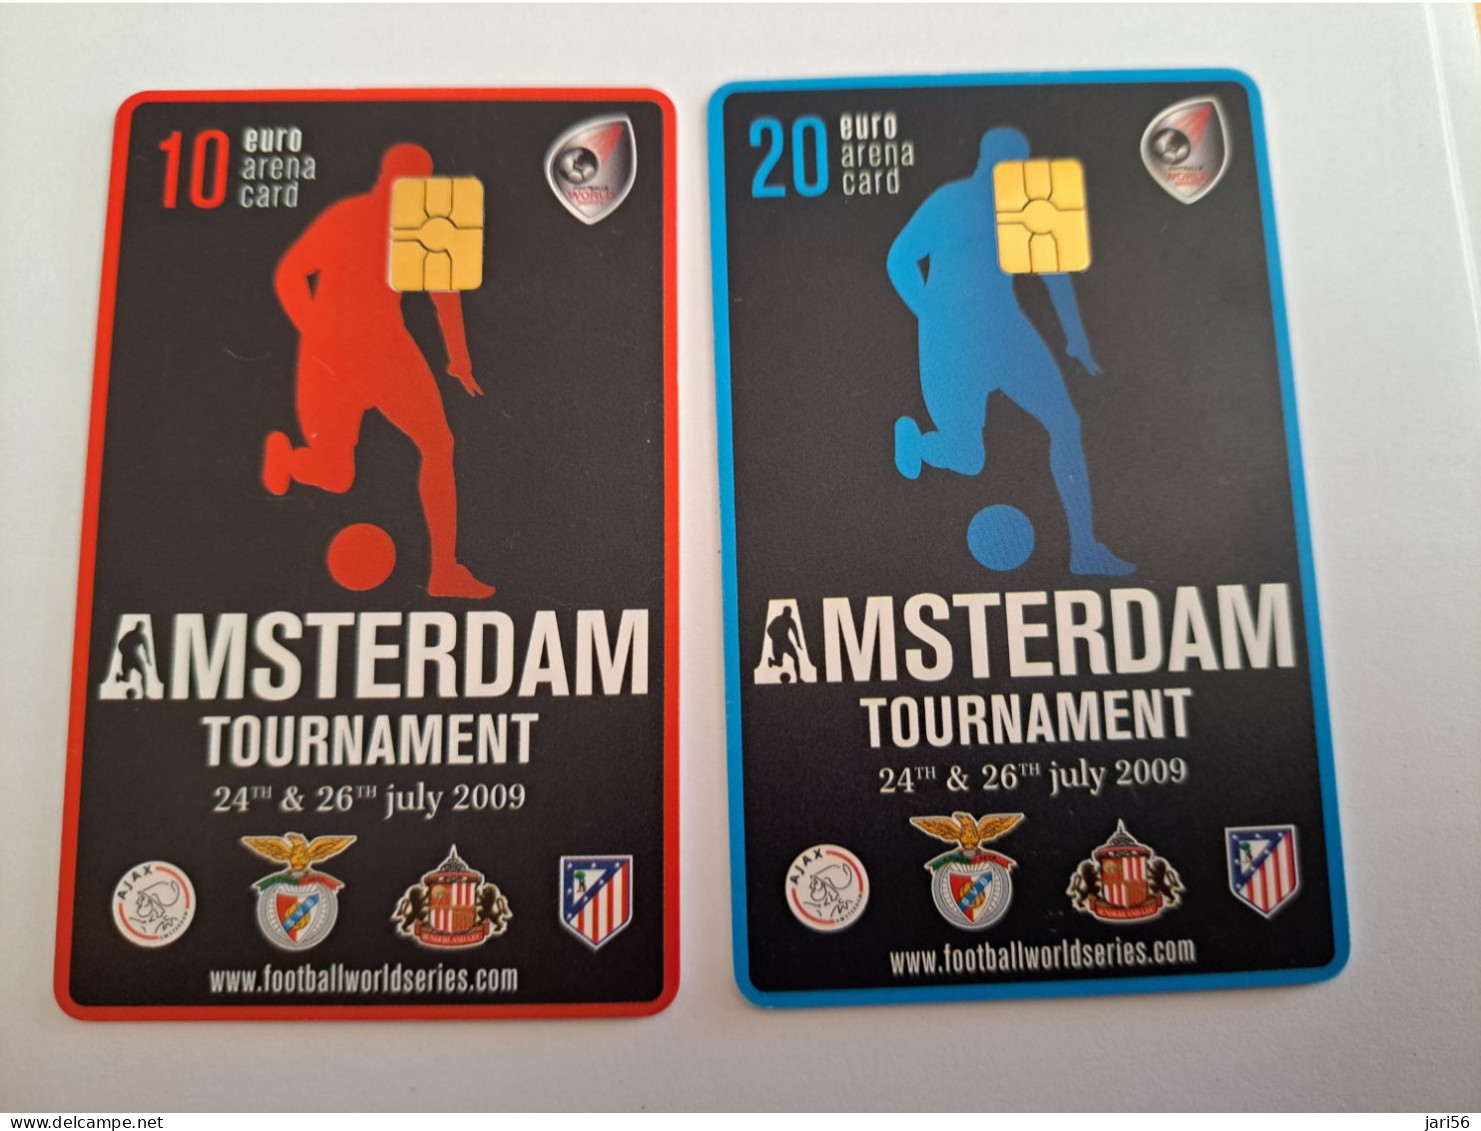 NETHERLANDS CHIPCARD / €10,- + € 20,- FOOTBAL/SOCCER TOURNAMENT ,- ARENA CARD / 2CARDS/ - USED CARD  ** 13591** - Pubbliche